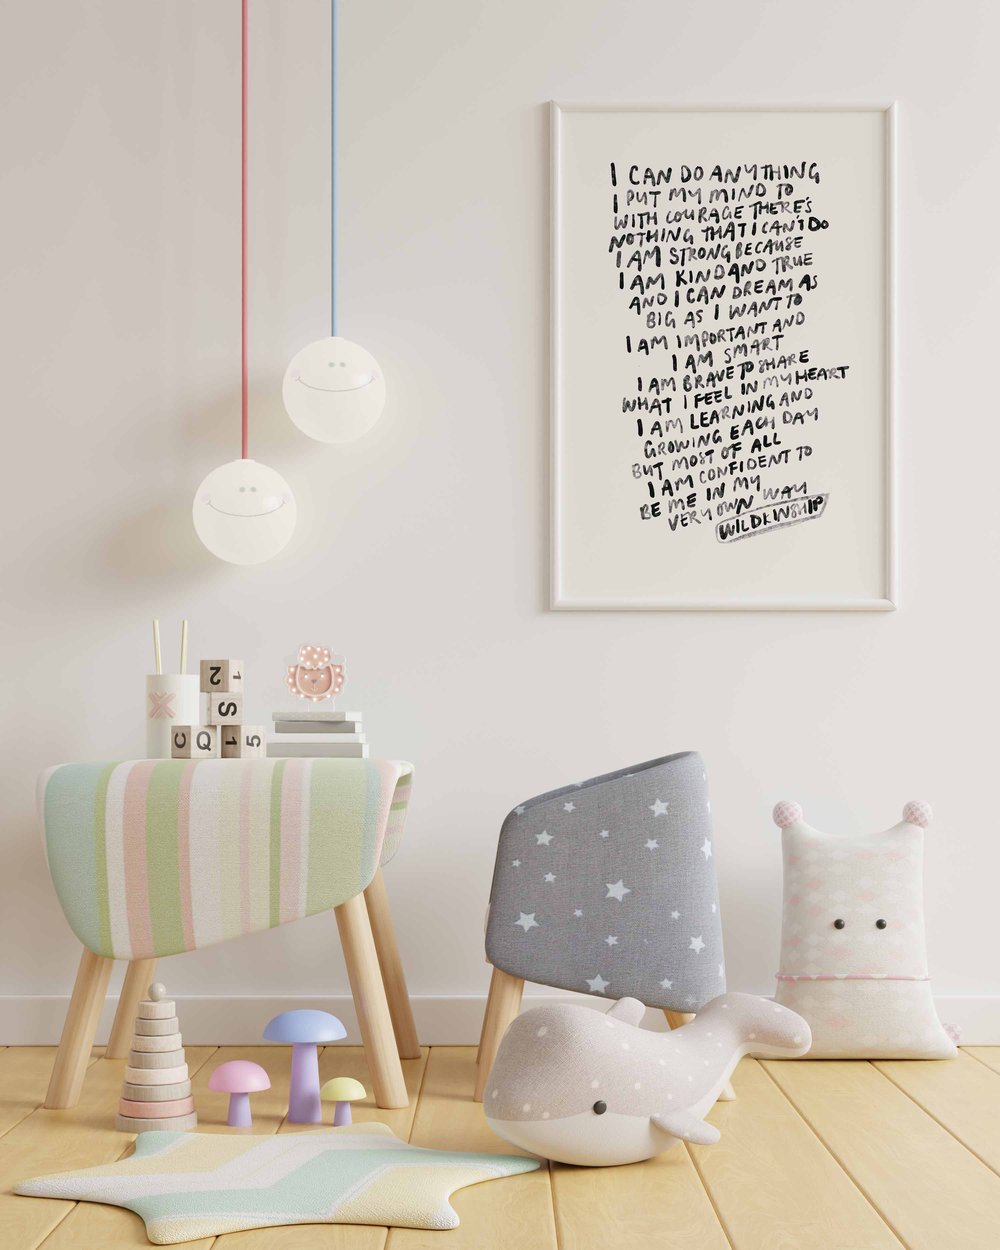 'I CAN DO ANYTHING' CHILDHOOD AFFIRMATIONS PRINT- VARIOUS SIZES